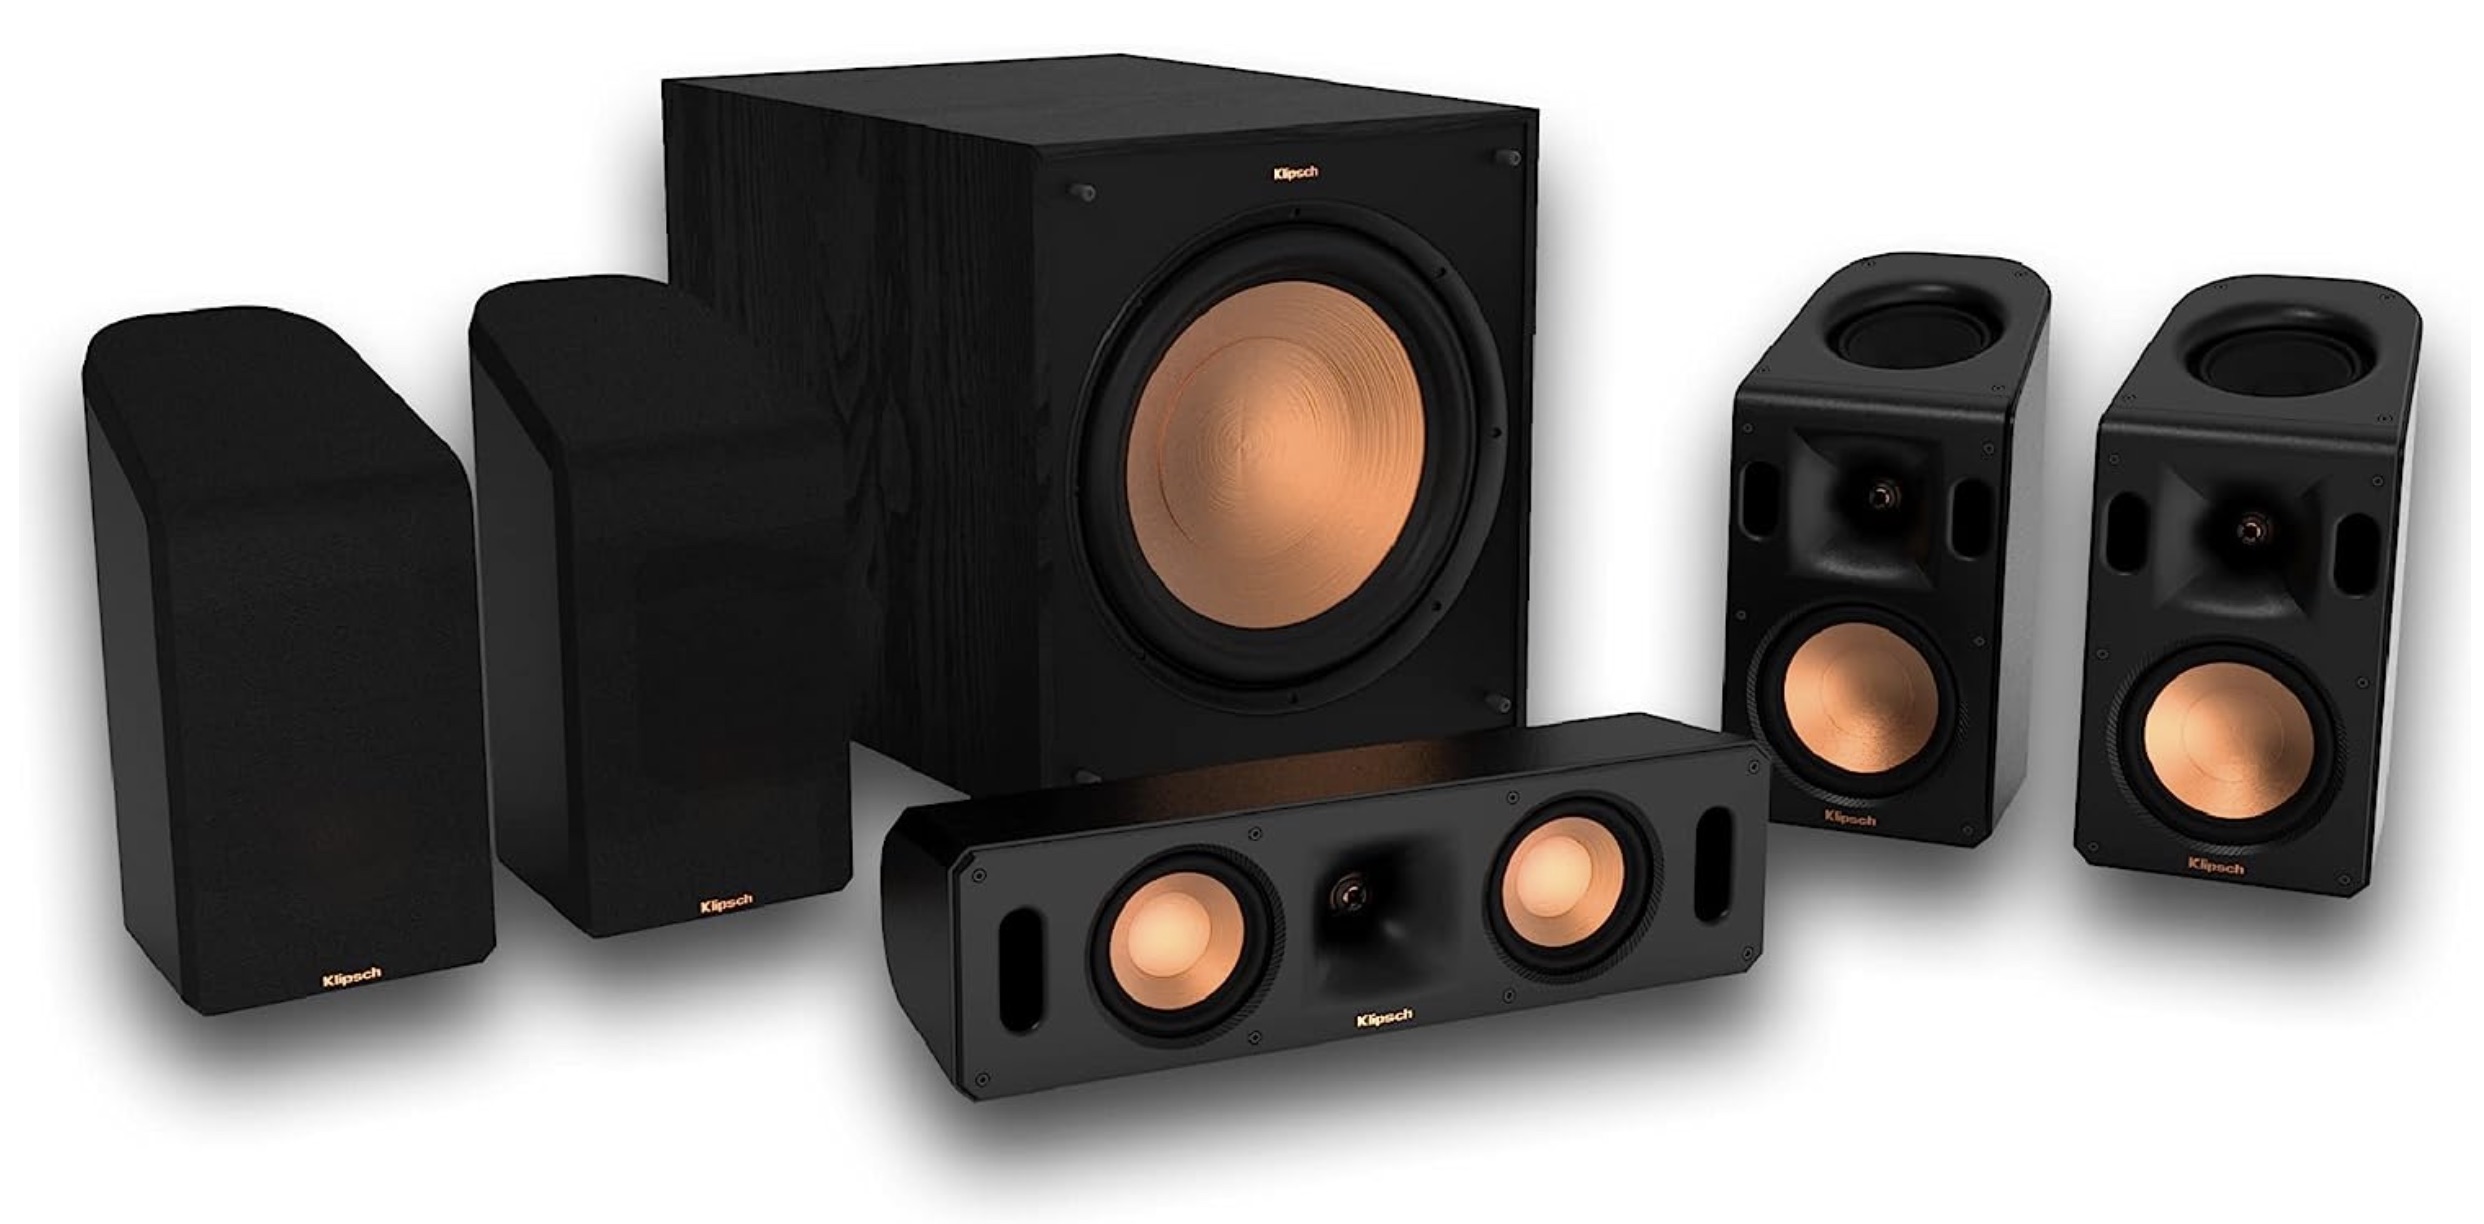 Best 5.1 Home Theater Systems of 2024